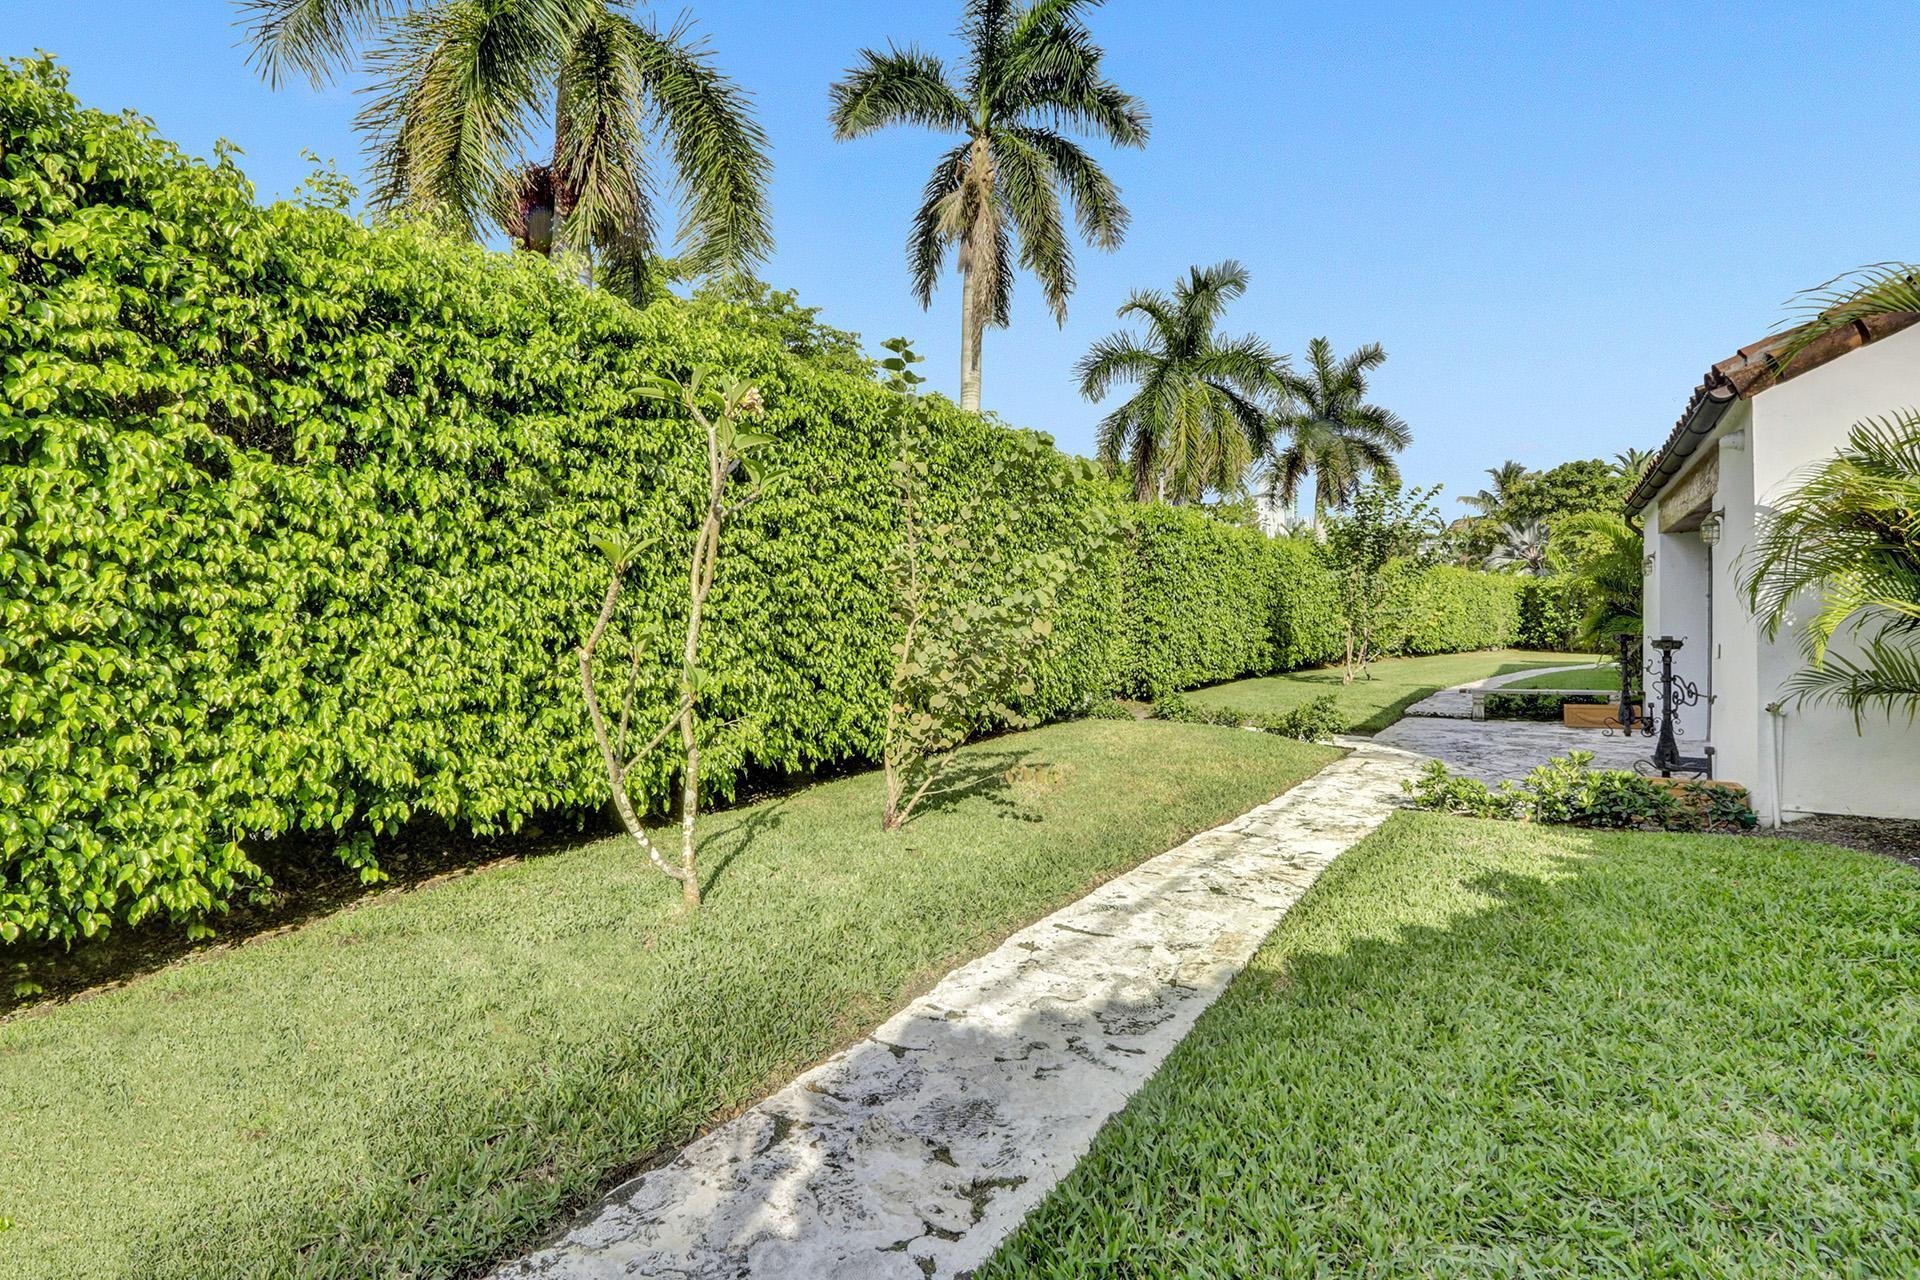 Check Out This Classic Miami Beach Mediterranean On Pine Tree Drive Asking $6.5 Million19.jpg